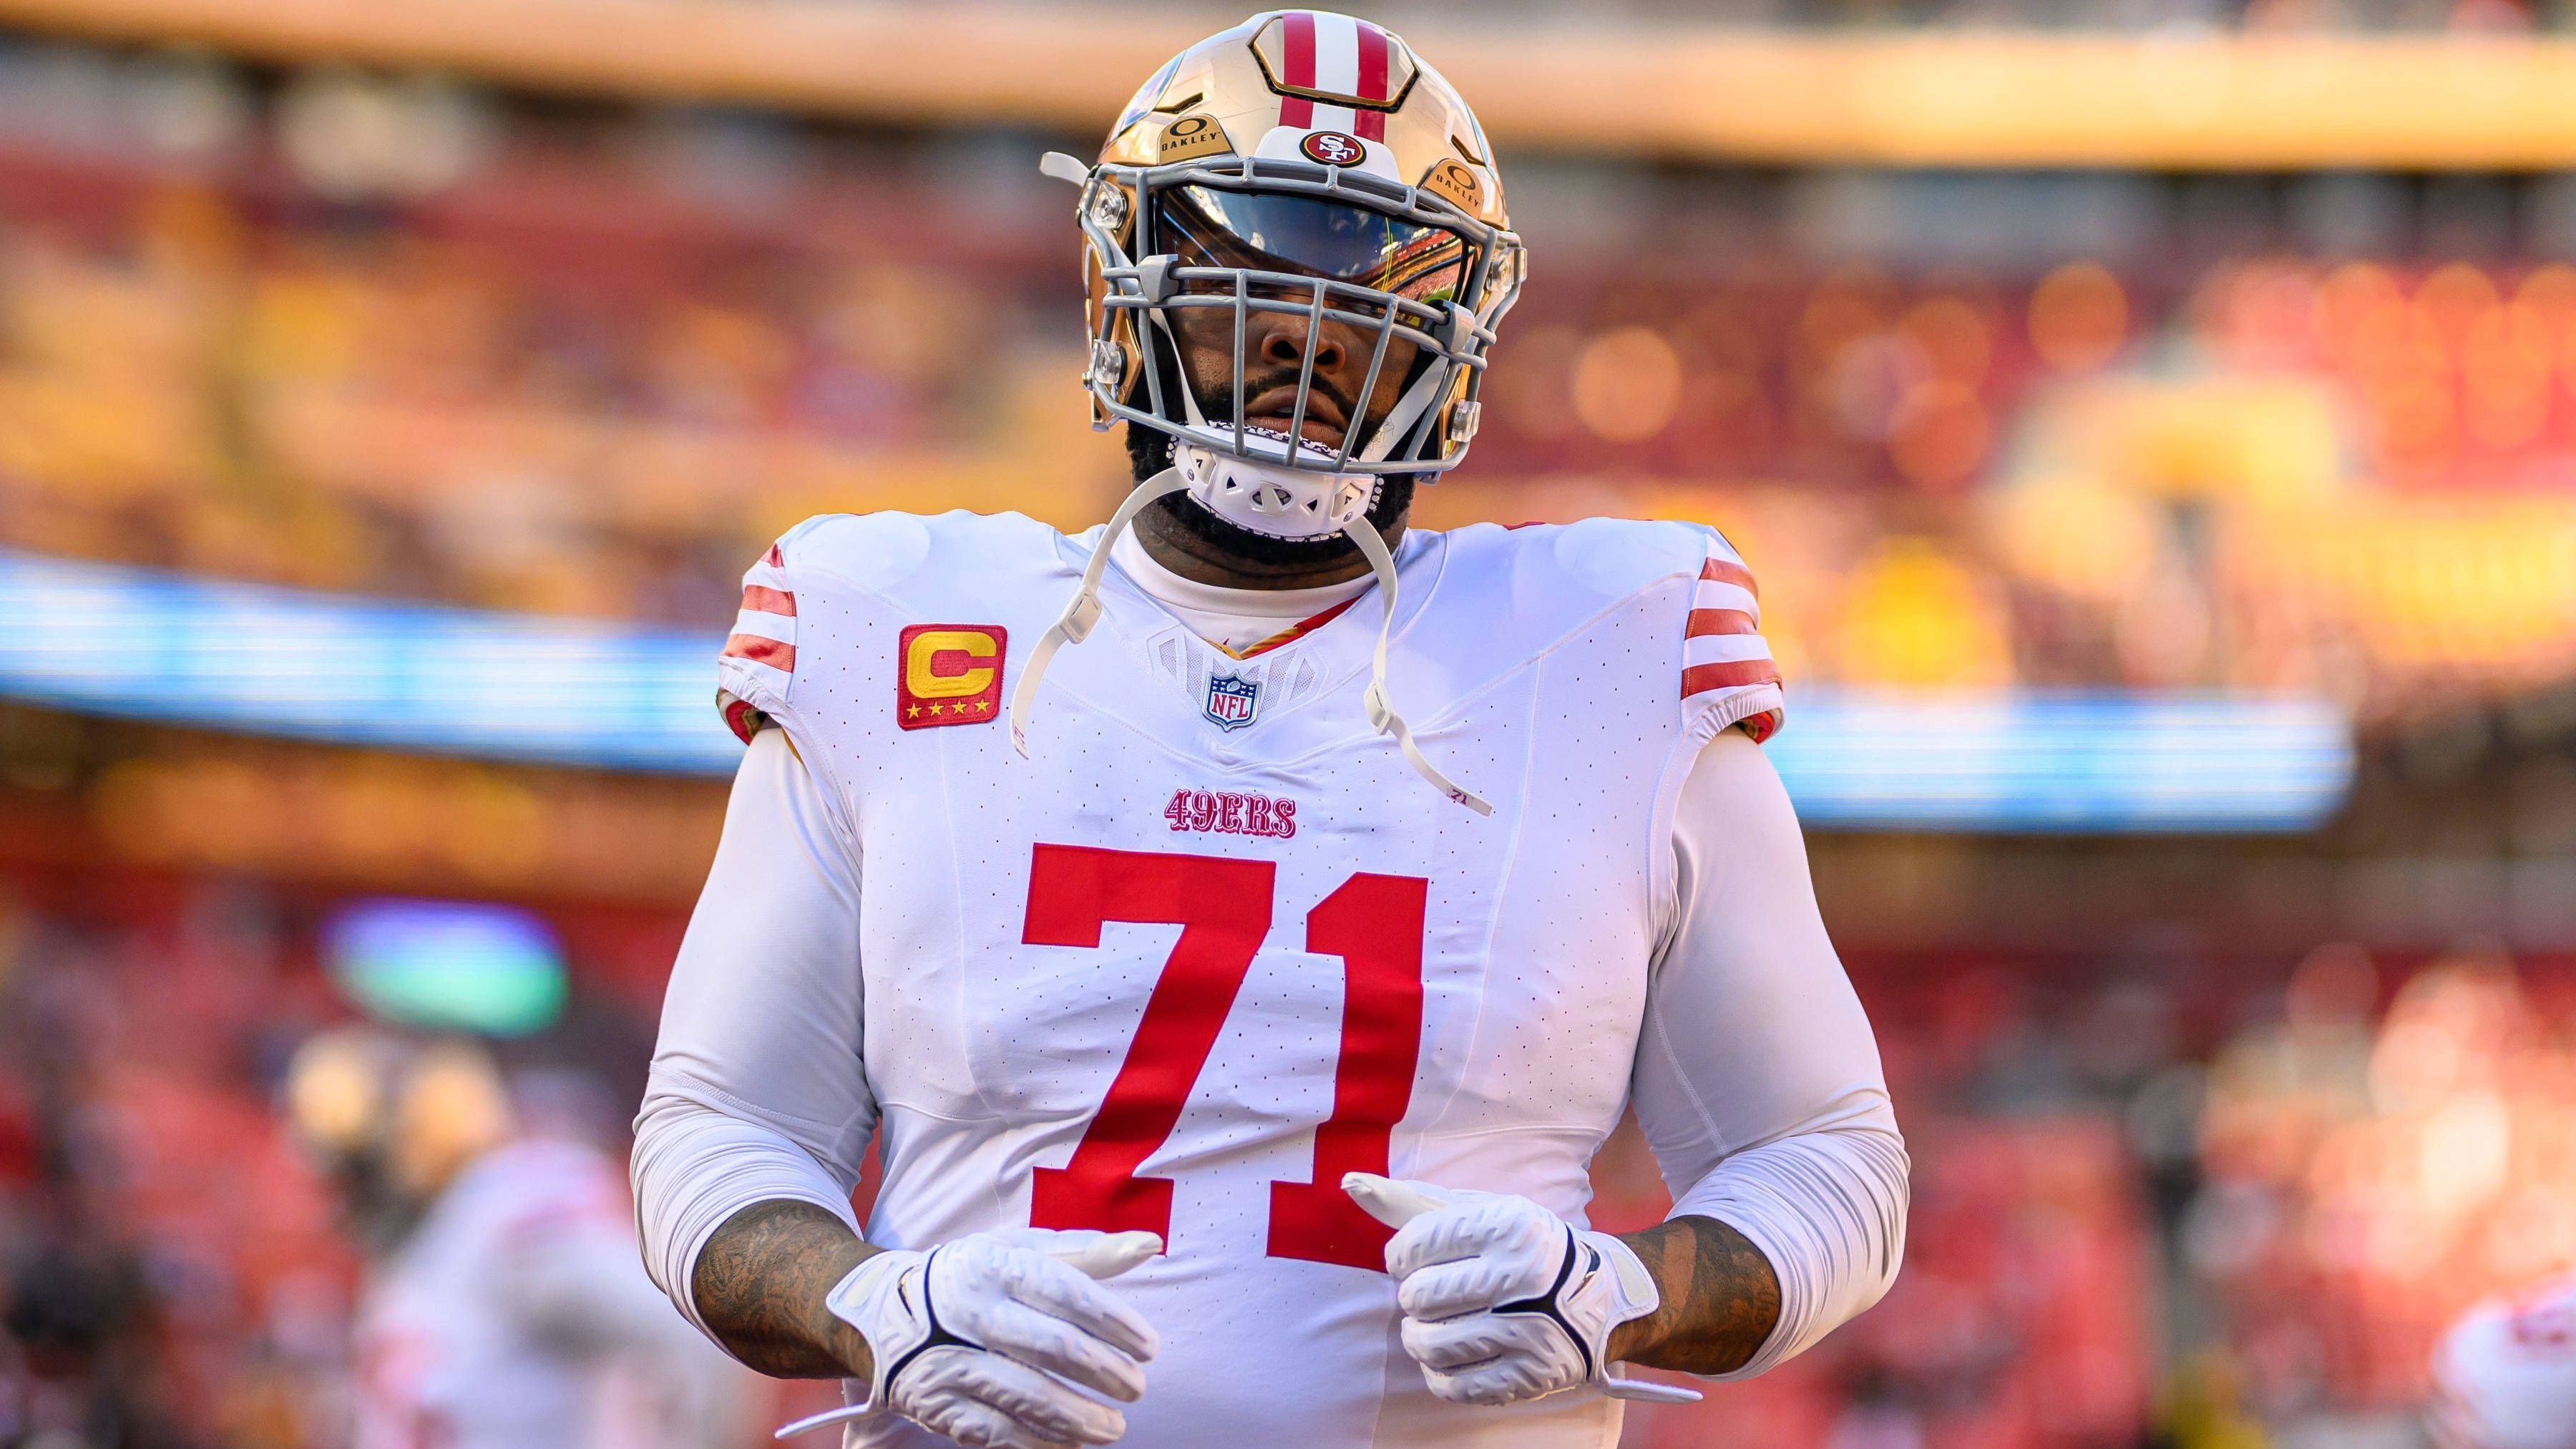 <strong>San Francisco 49ers: Trent Williams<br></strong>Alter: 35 Jahre, 8 Monate und 22 Tage<br>Geburtsdatum: 19. Juli 1988<br>Position: Offensive Tackle